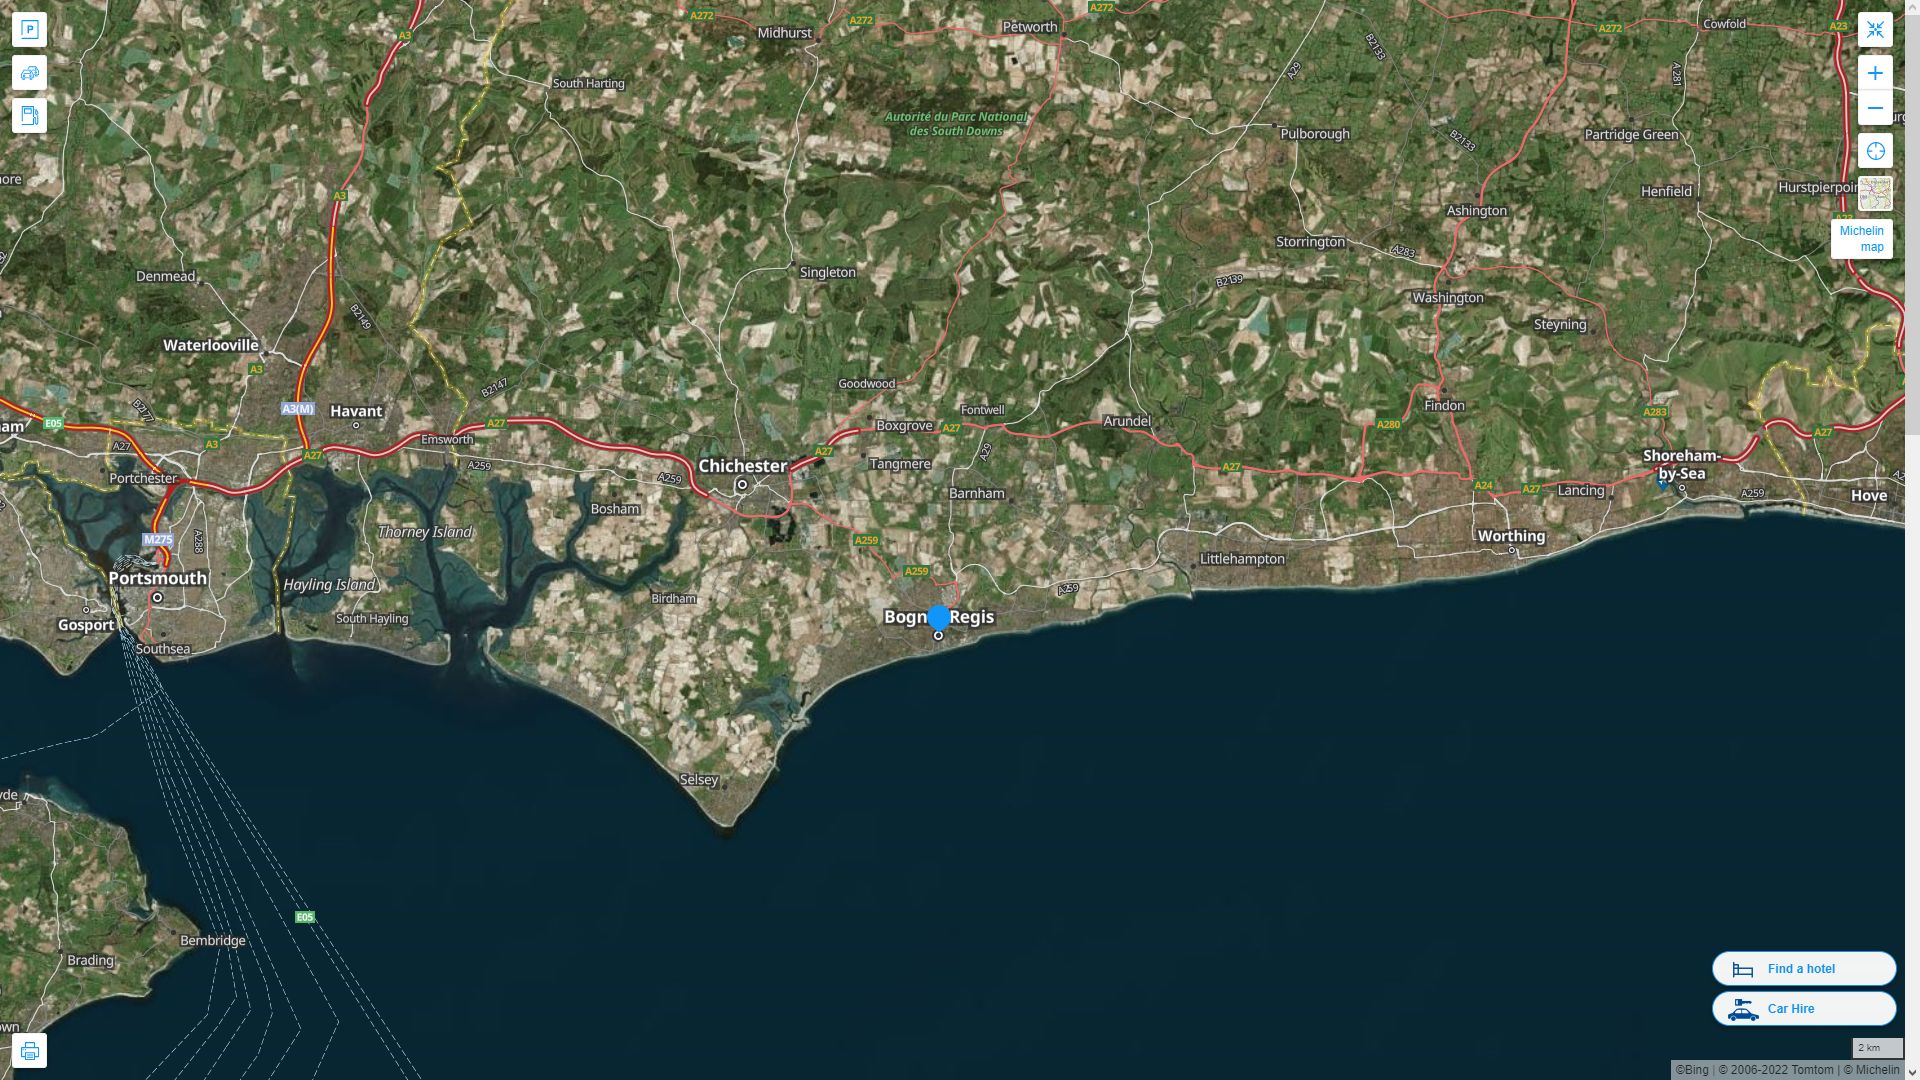 Bognor Regis Highway and Road Map with Satellite View